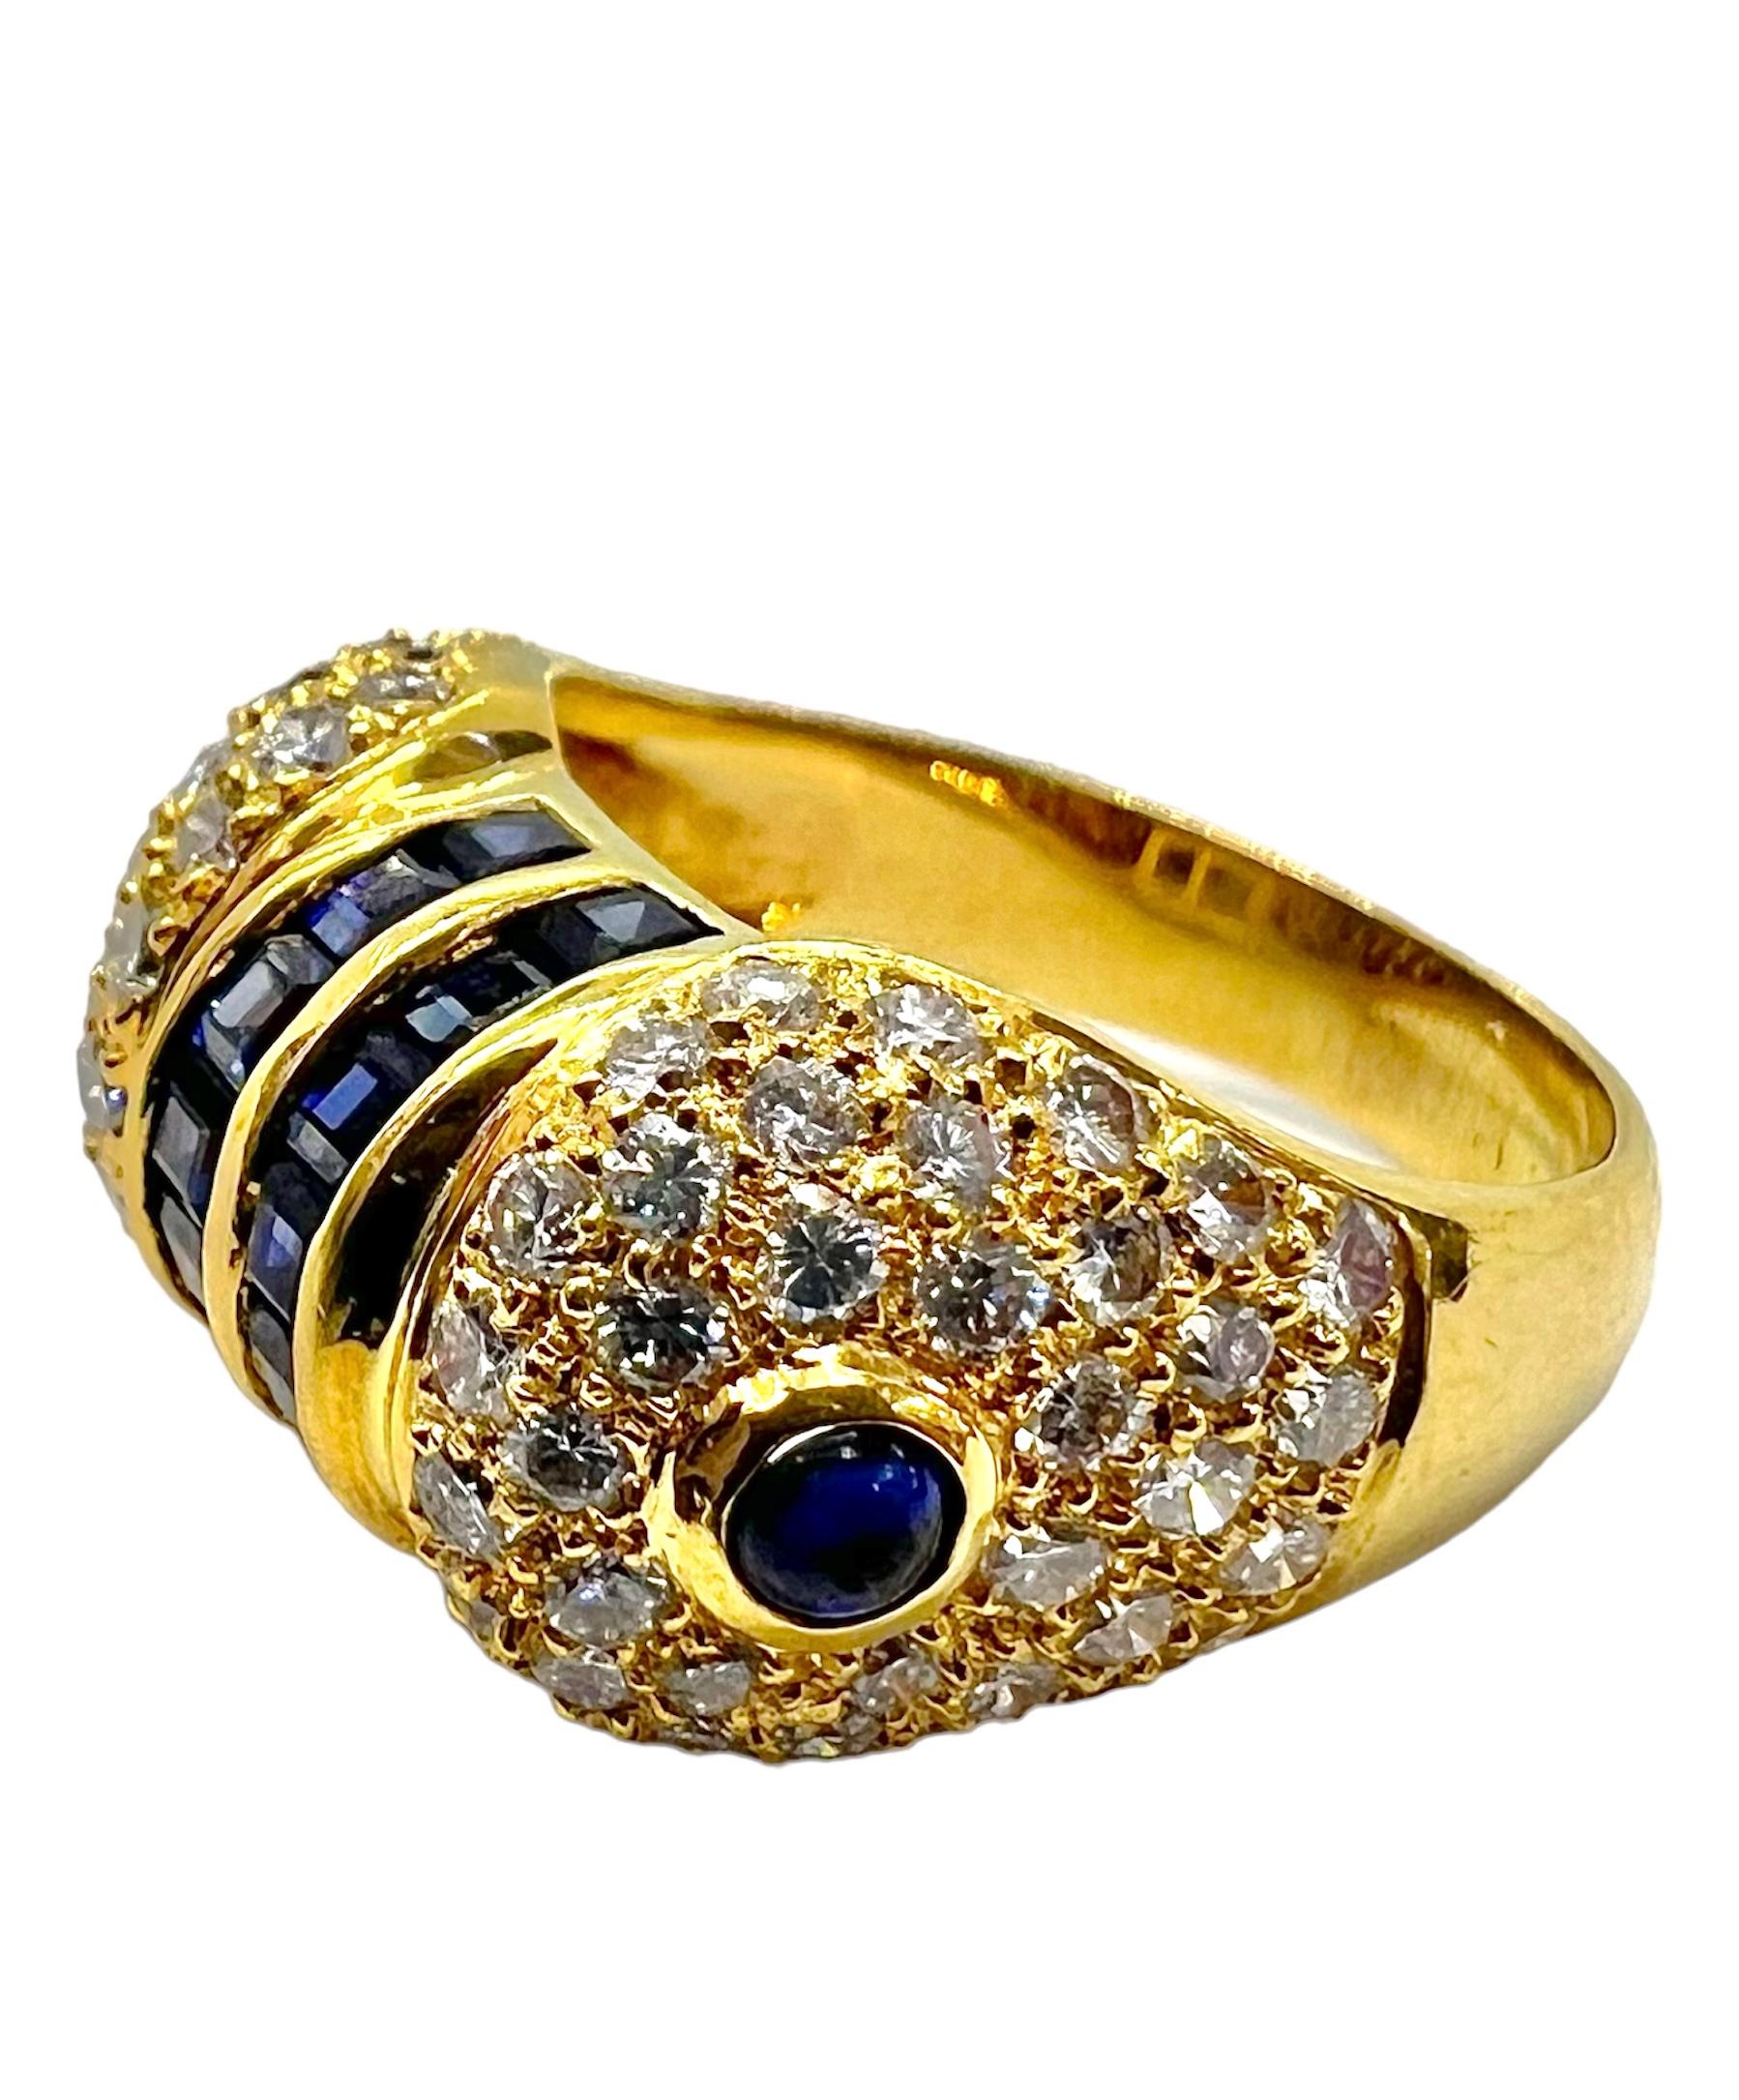 18K yellow gold ring with 1.65 carat diamonds and 1.59 carat blue sapphire.

Sophia D by Joseph Dardashti LTD has been known worldwide for 35 years and are inspired by classic Art Deco design that merges with modern manufacturing techniques.  